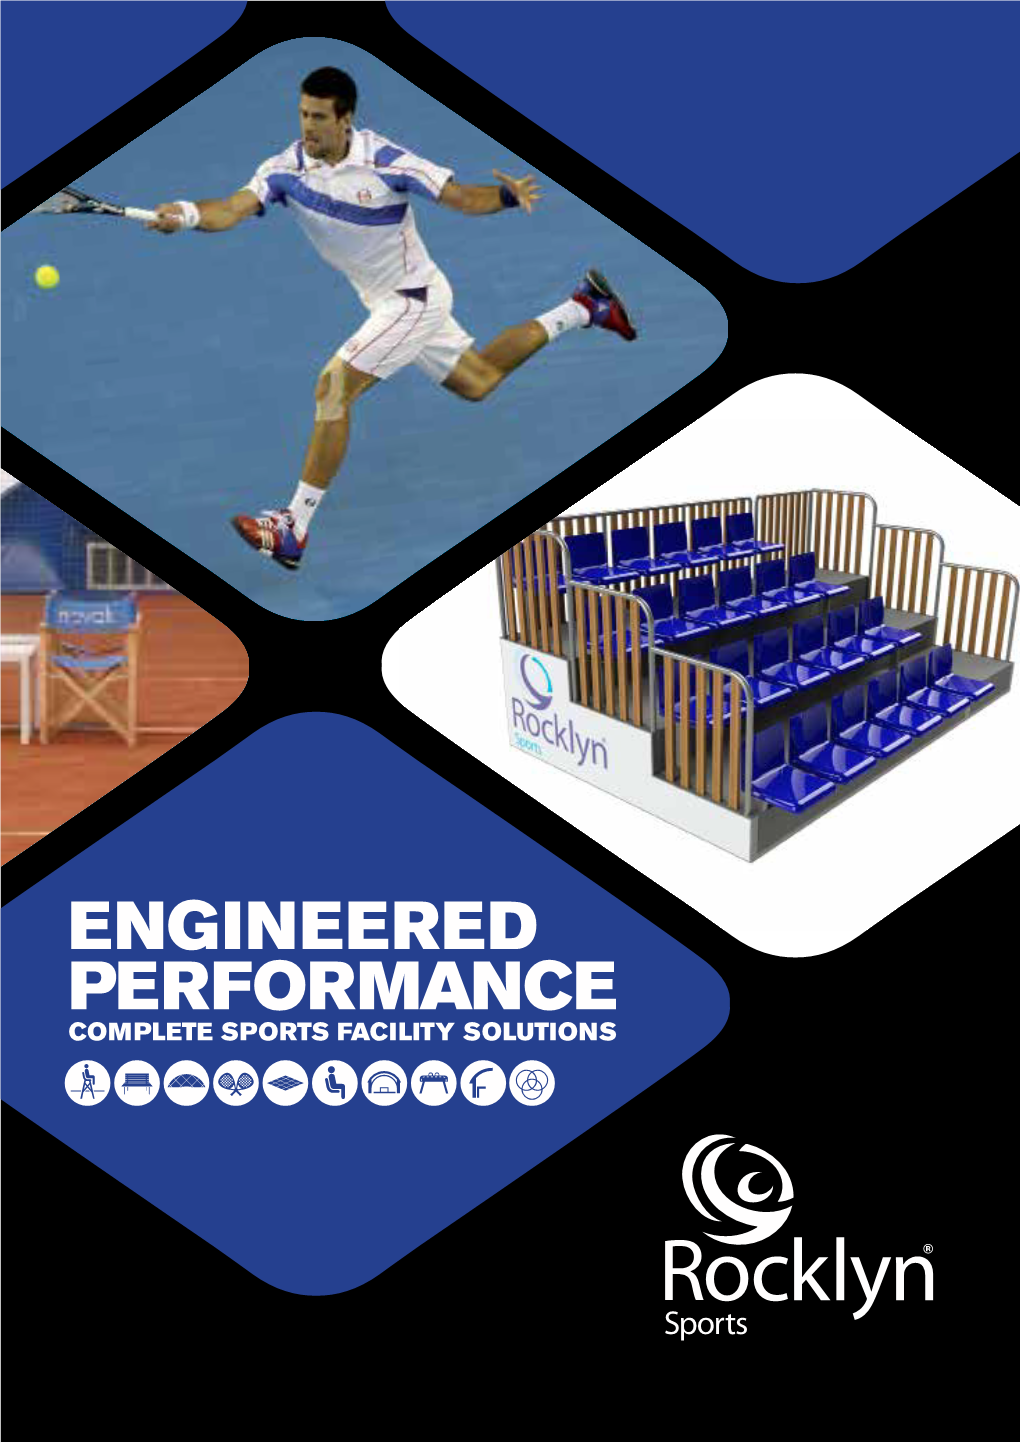 ENGINEERED PERFORMANCE COMPLETE SPORTS FACILITY SOLUTIONS ROCKLYN SPORTS Contents